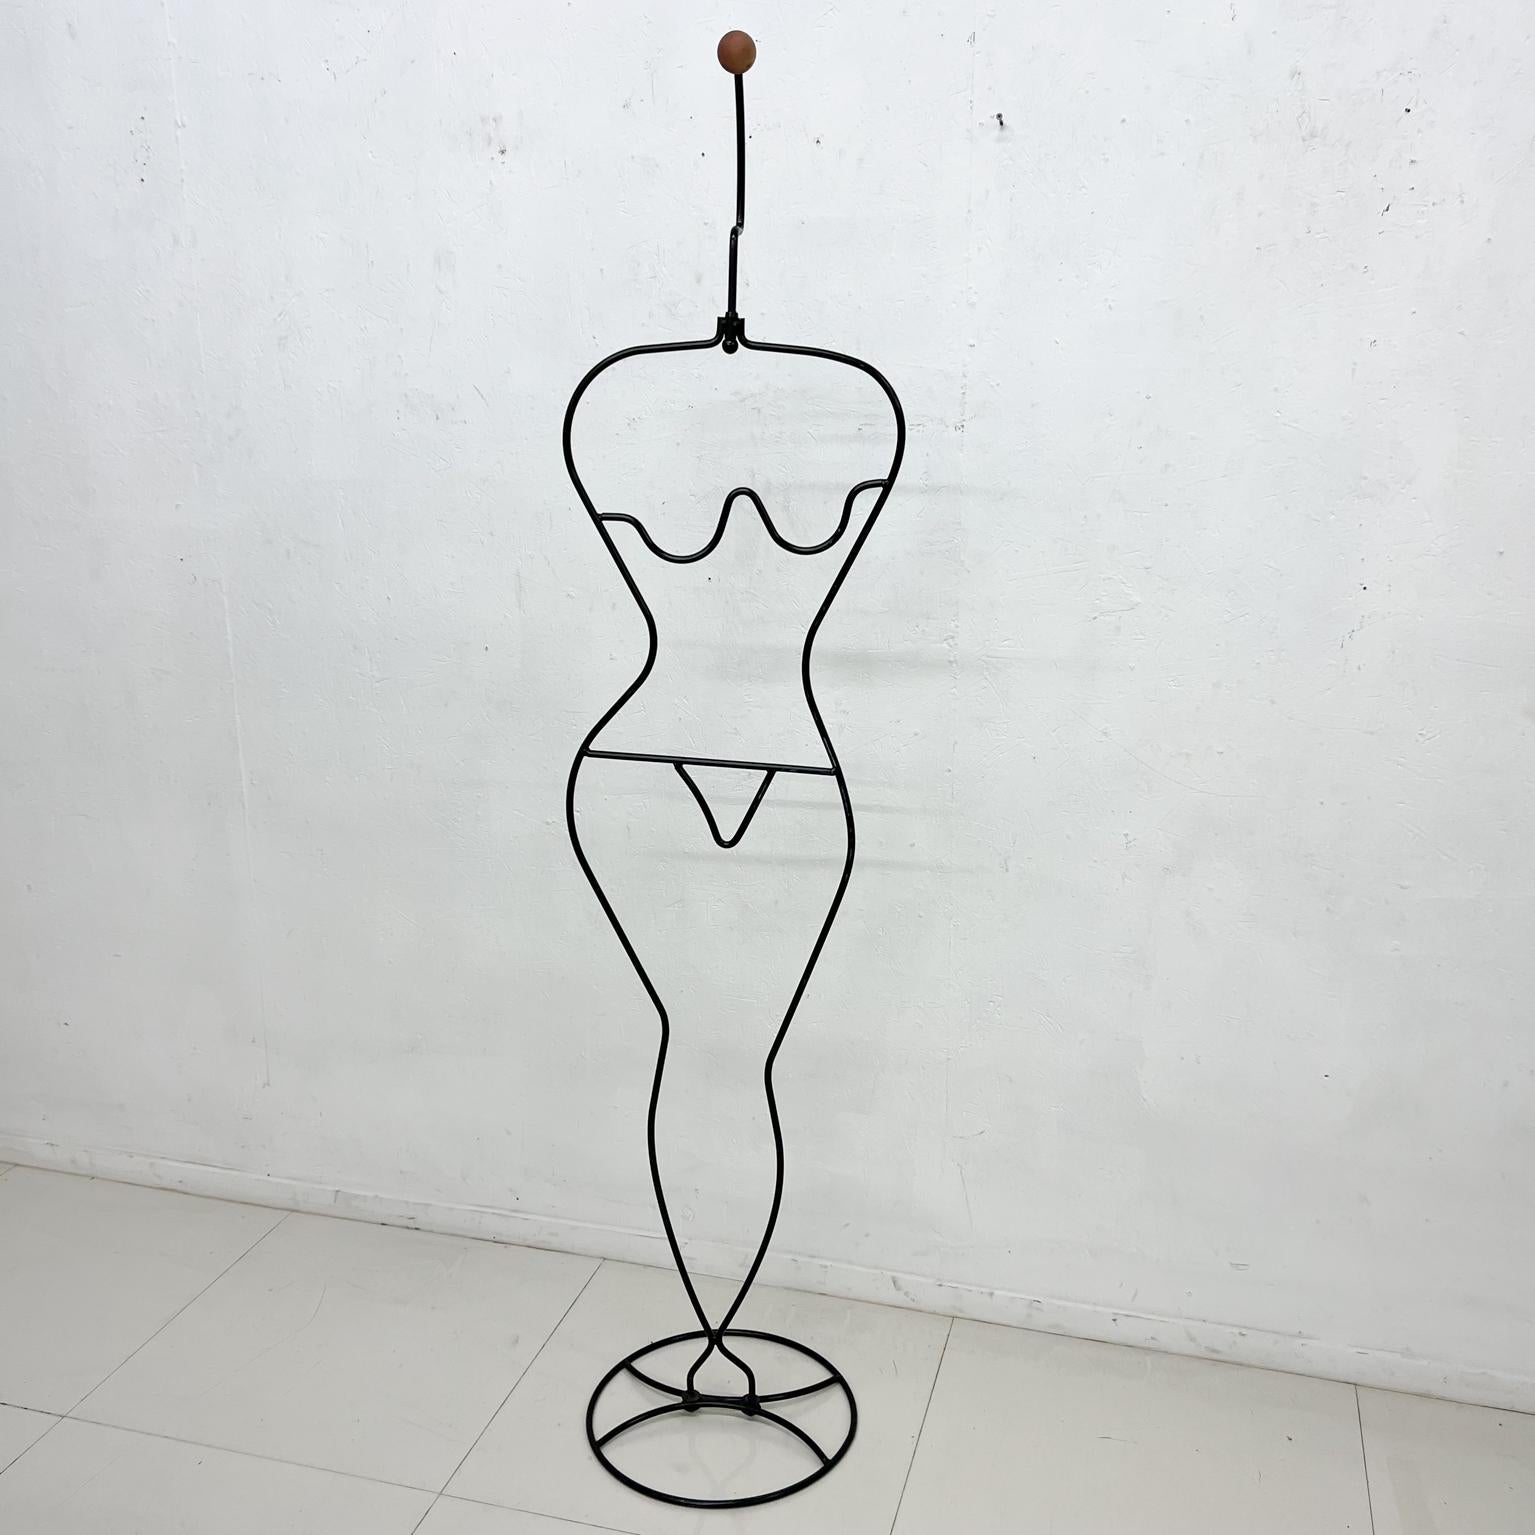 1980s Modern Nude Valet Häpen by Ehlen Johansson Sweden
Tubular metal art wire frame with wooden-ball top.
In the style of John Risley wrought iron metal art.
72 tall x 16.25 w x 15.25
Preowned unrestored vintage condition.
See images